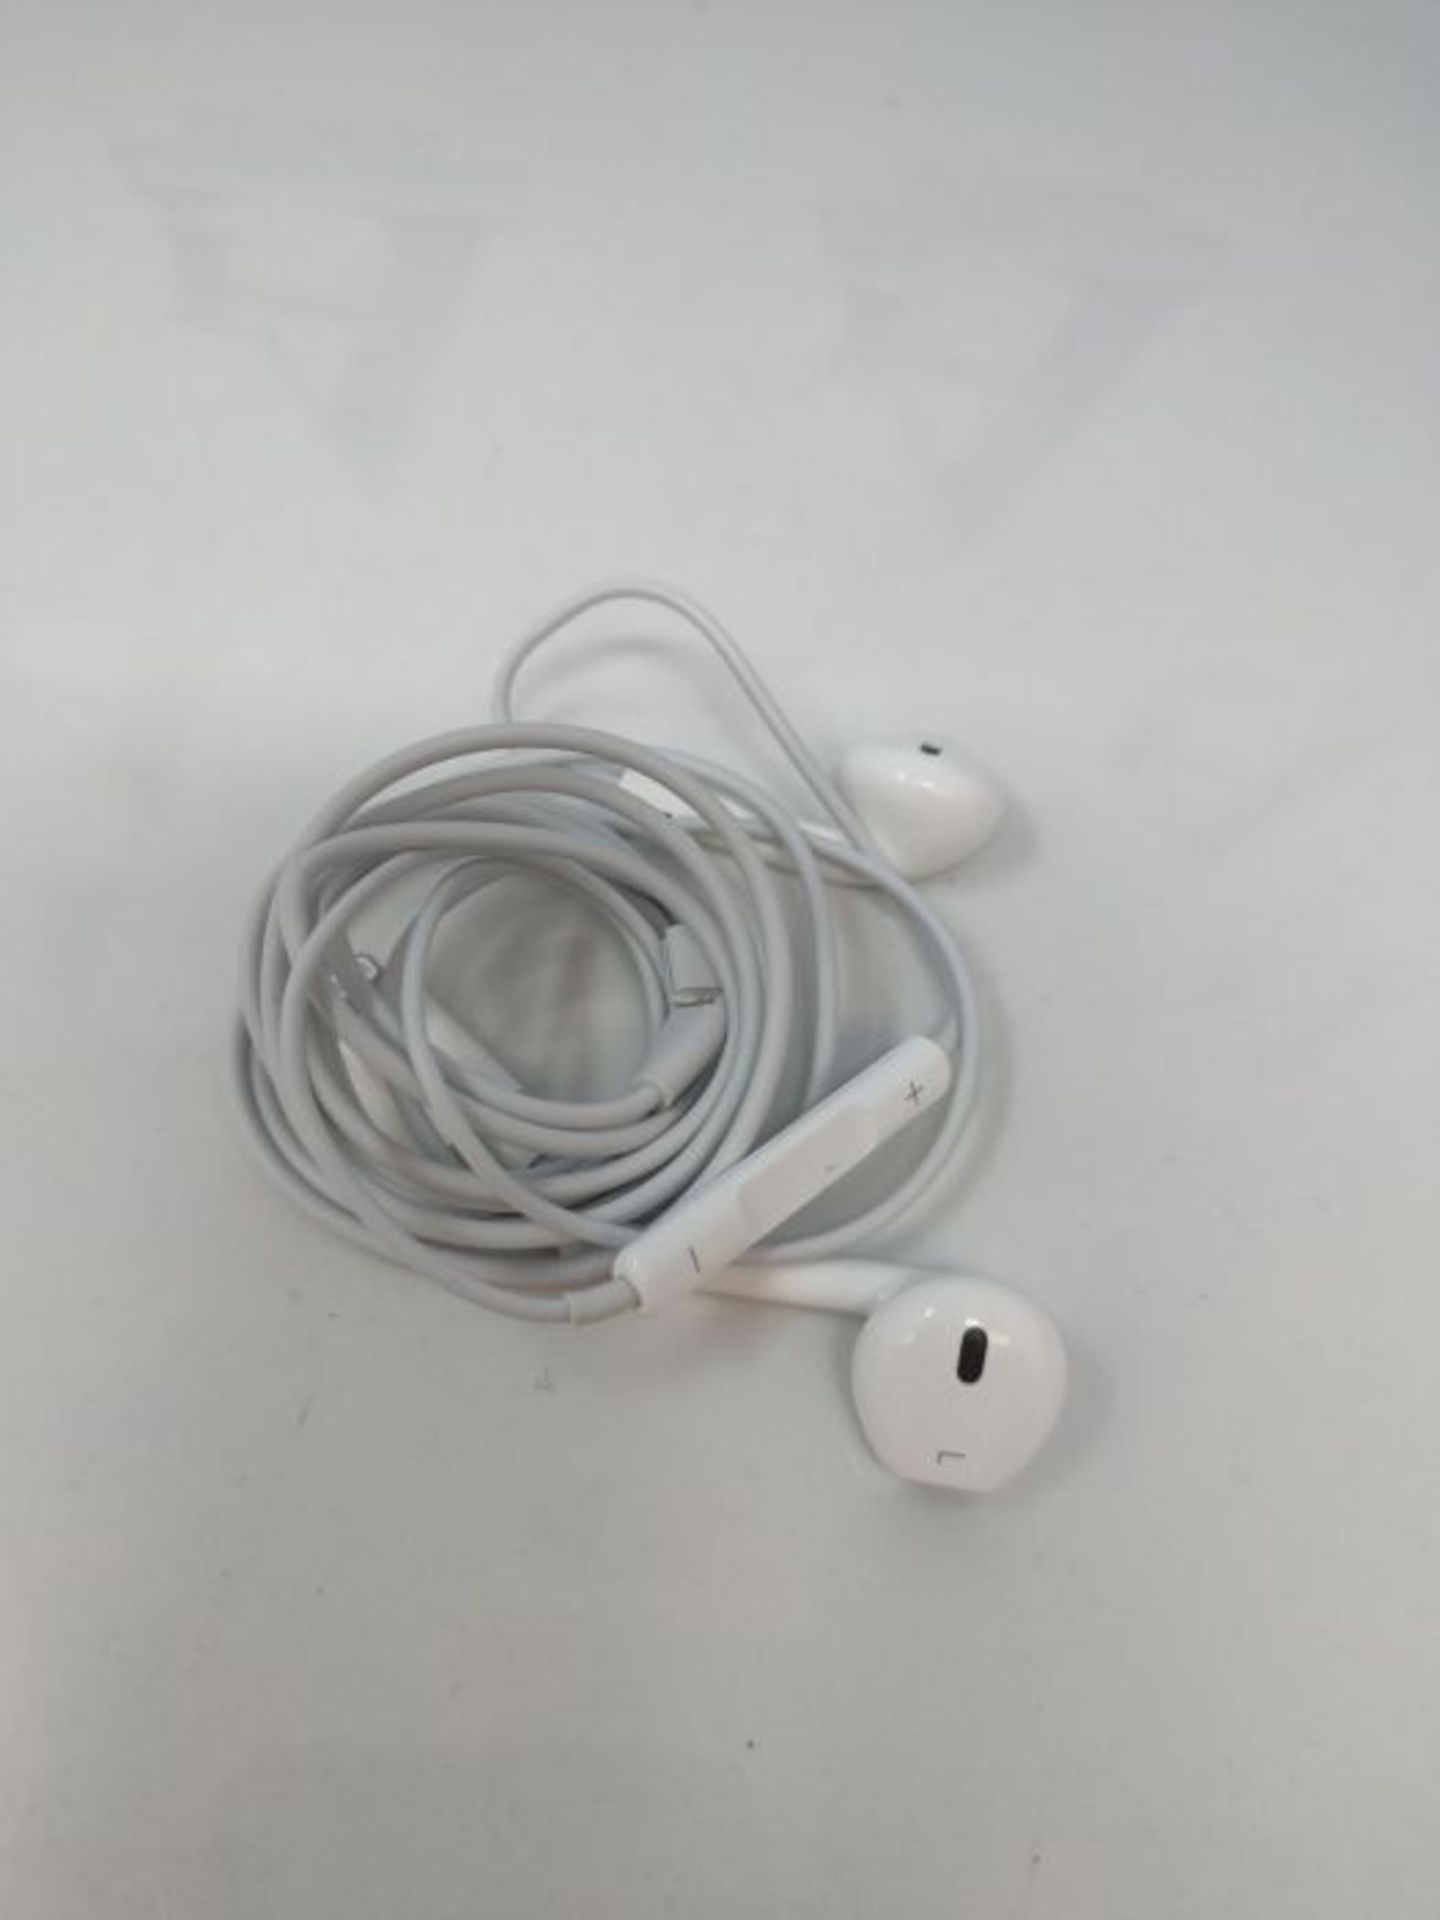 Apple EarPods with Lightning Connector - White - Image 2 of 2